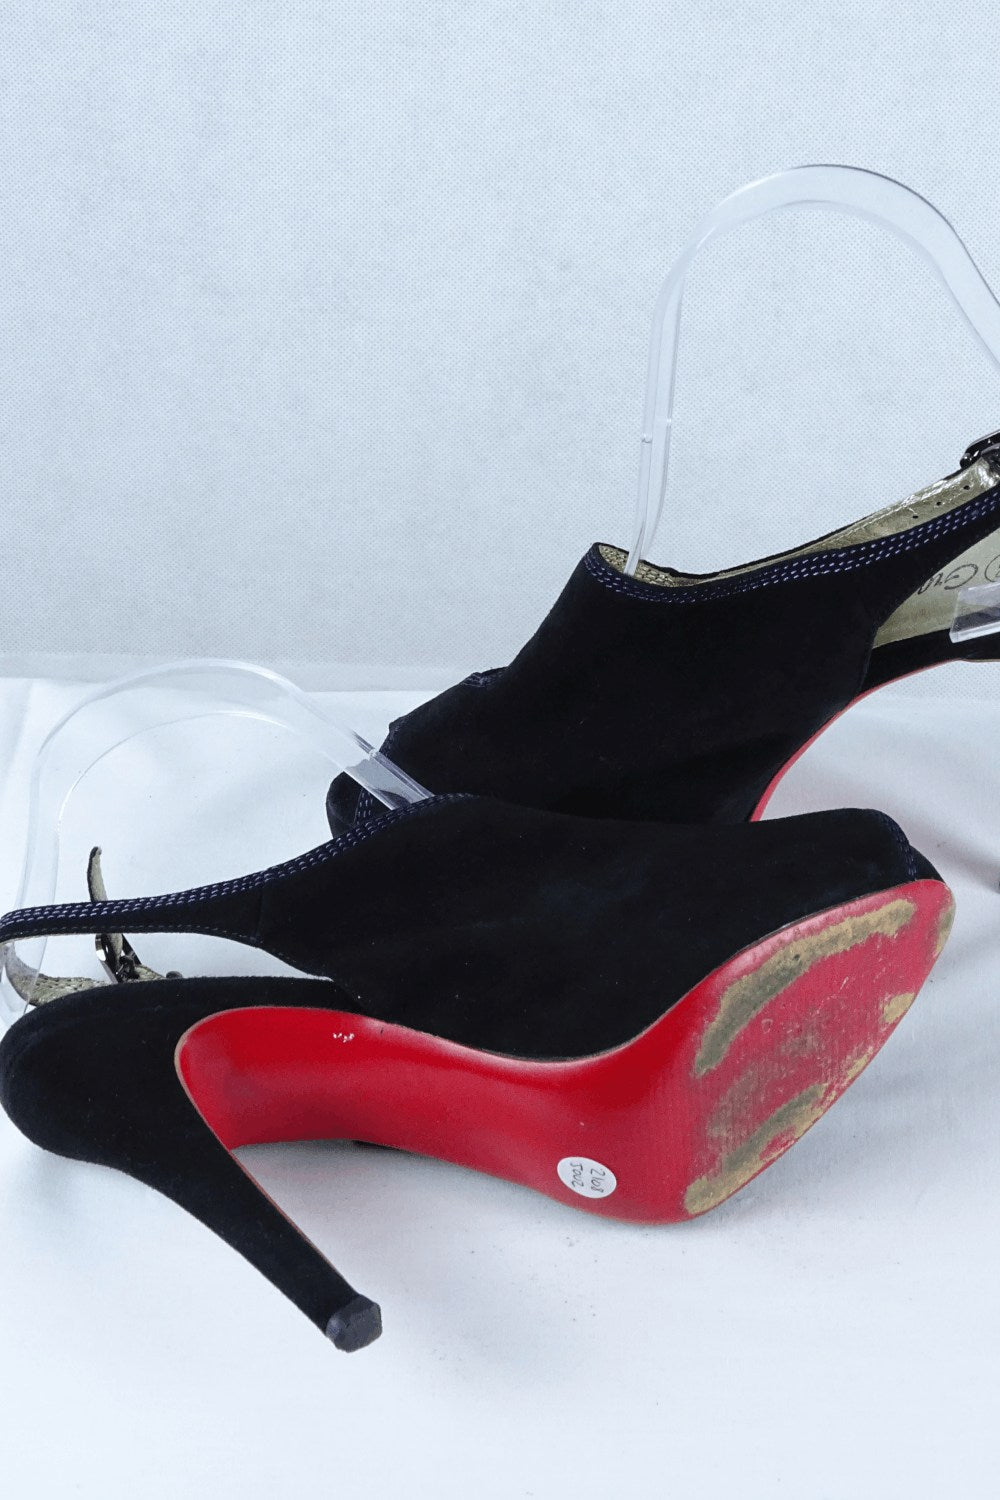 Graciano Black Shoes With Red Heel 6 AU